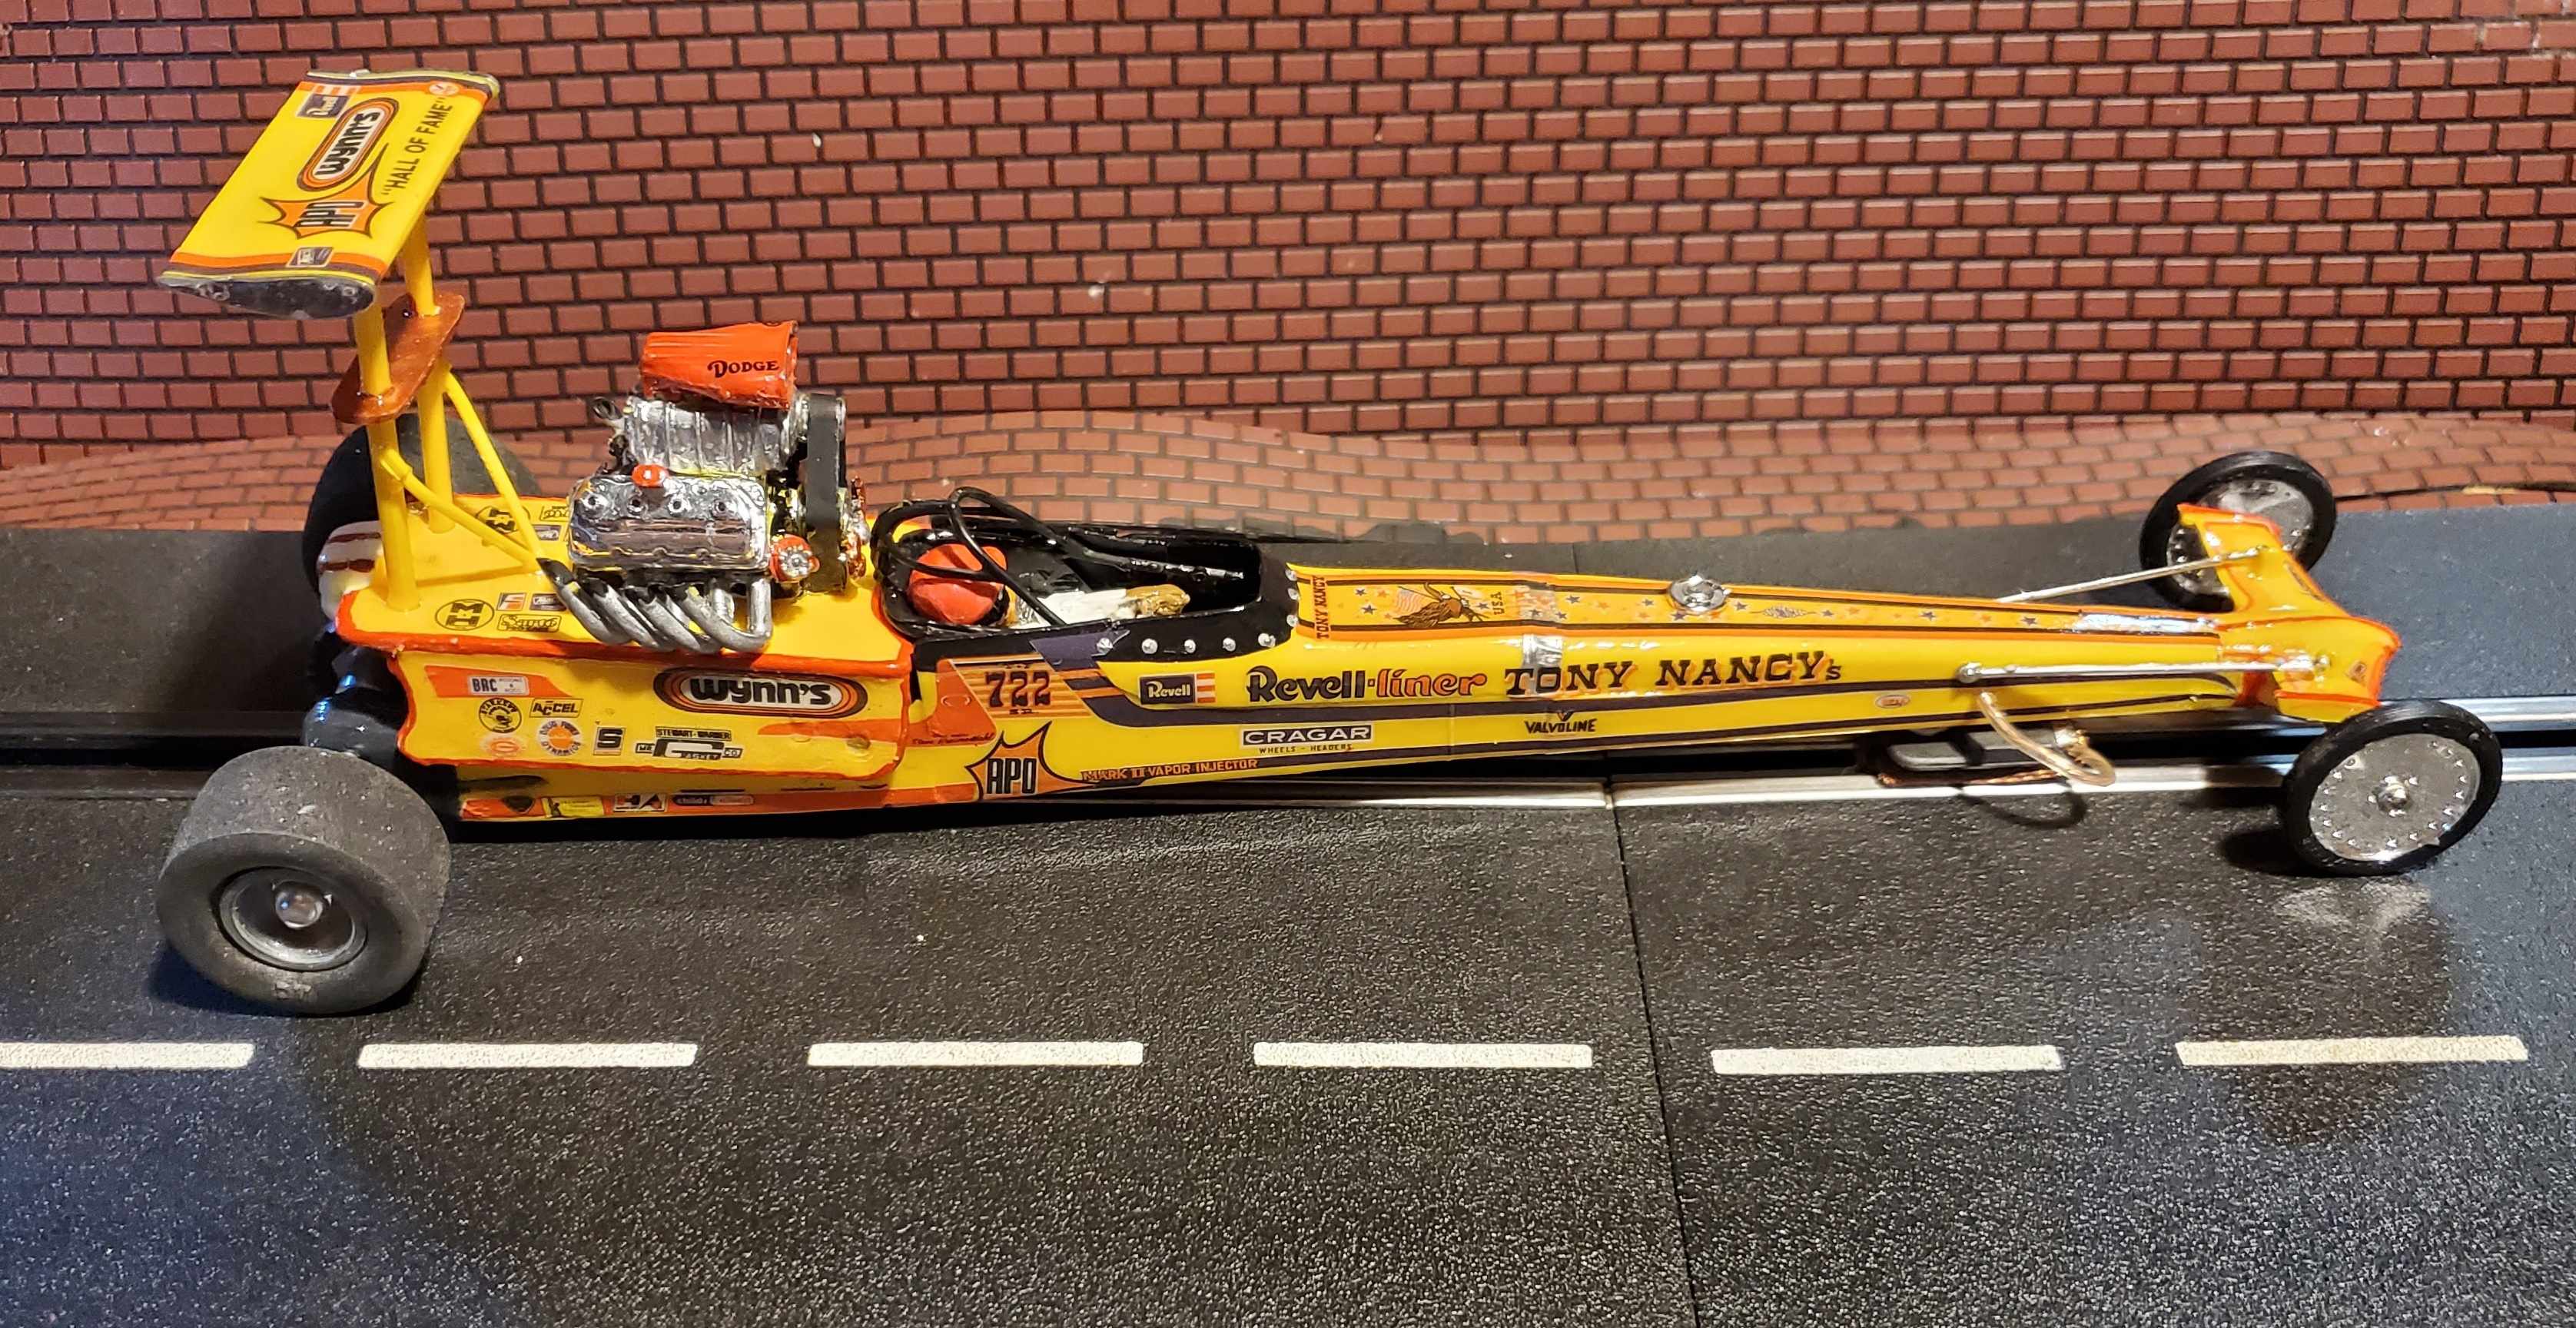 * SOLD * * Sale for Mike St.C. * Revell Tony Nancy’s Revell-liner 722 Dragster 1/24 Scale Slot Car